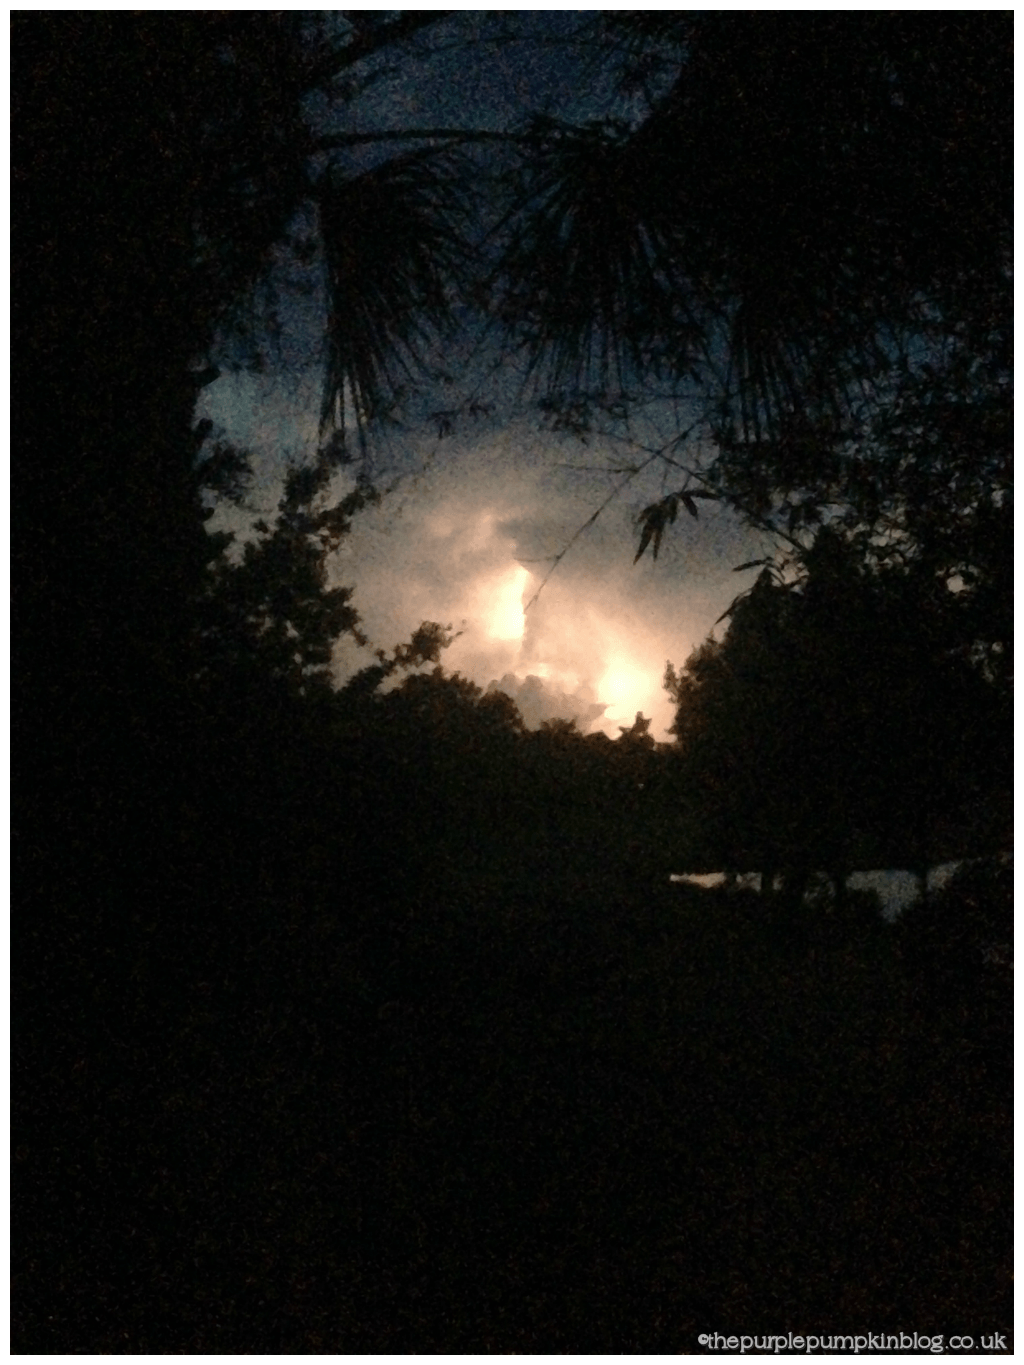 Early Morning Lightning Storm at Old Key West